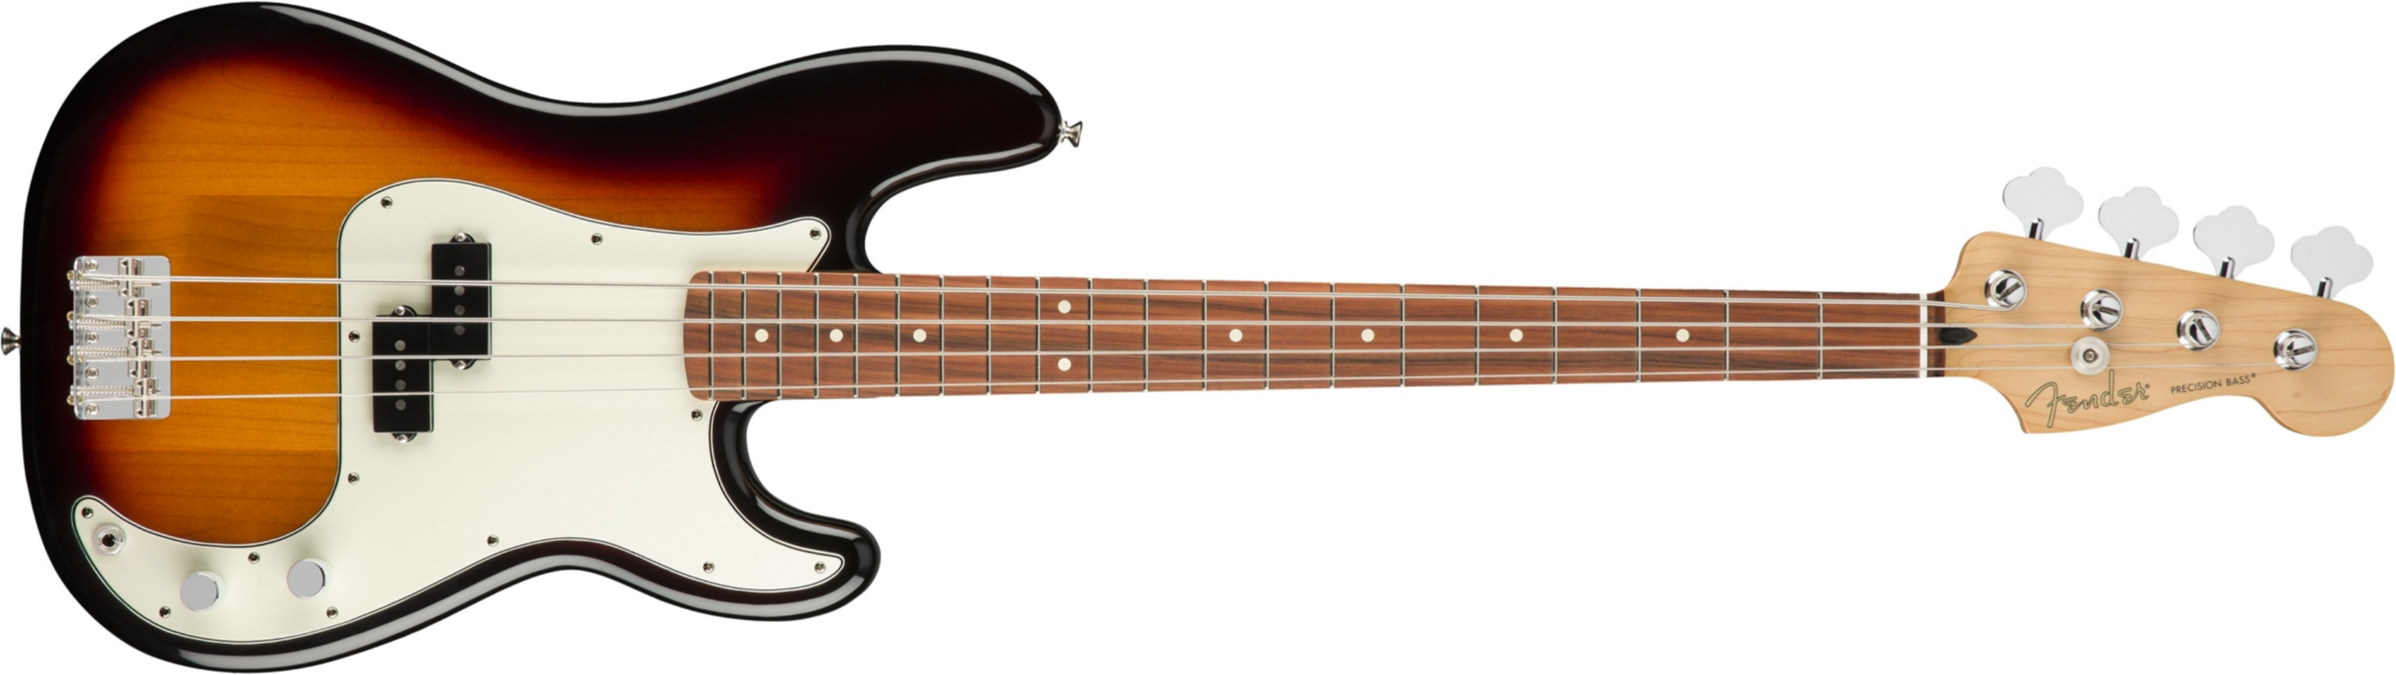 Fender Precision Bass Player Mex Pf - 3-color Sunburst - Solid body electric bass - Main picture